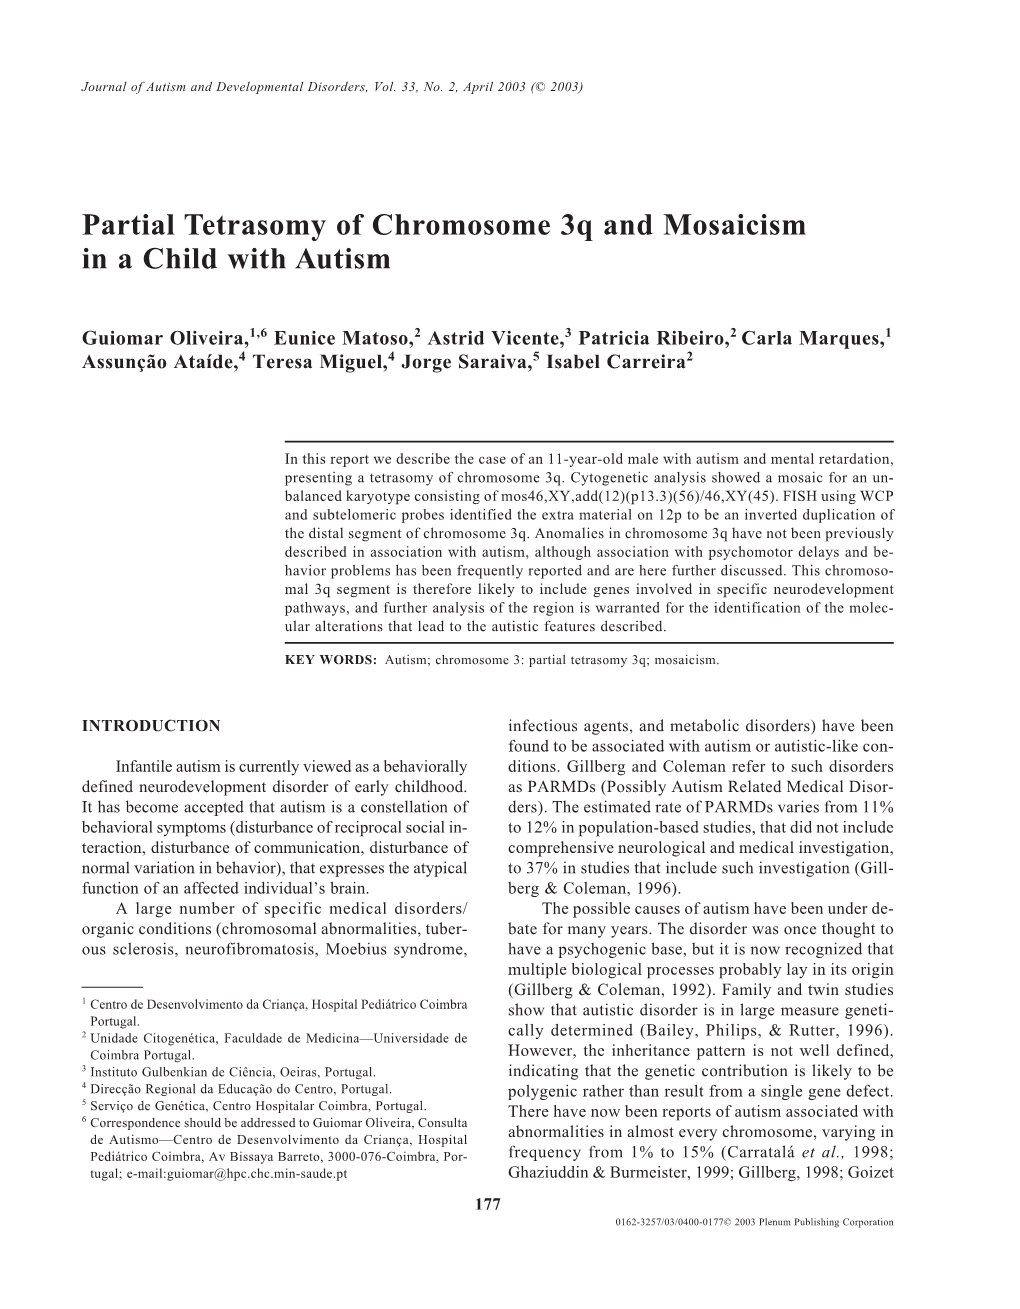 Partial Tetrasomy of Chromosome 3Q and Mosaicism in a Child with Autism